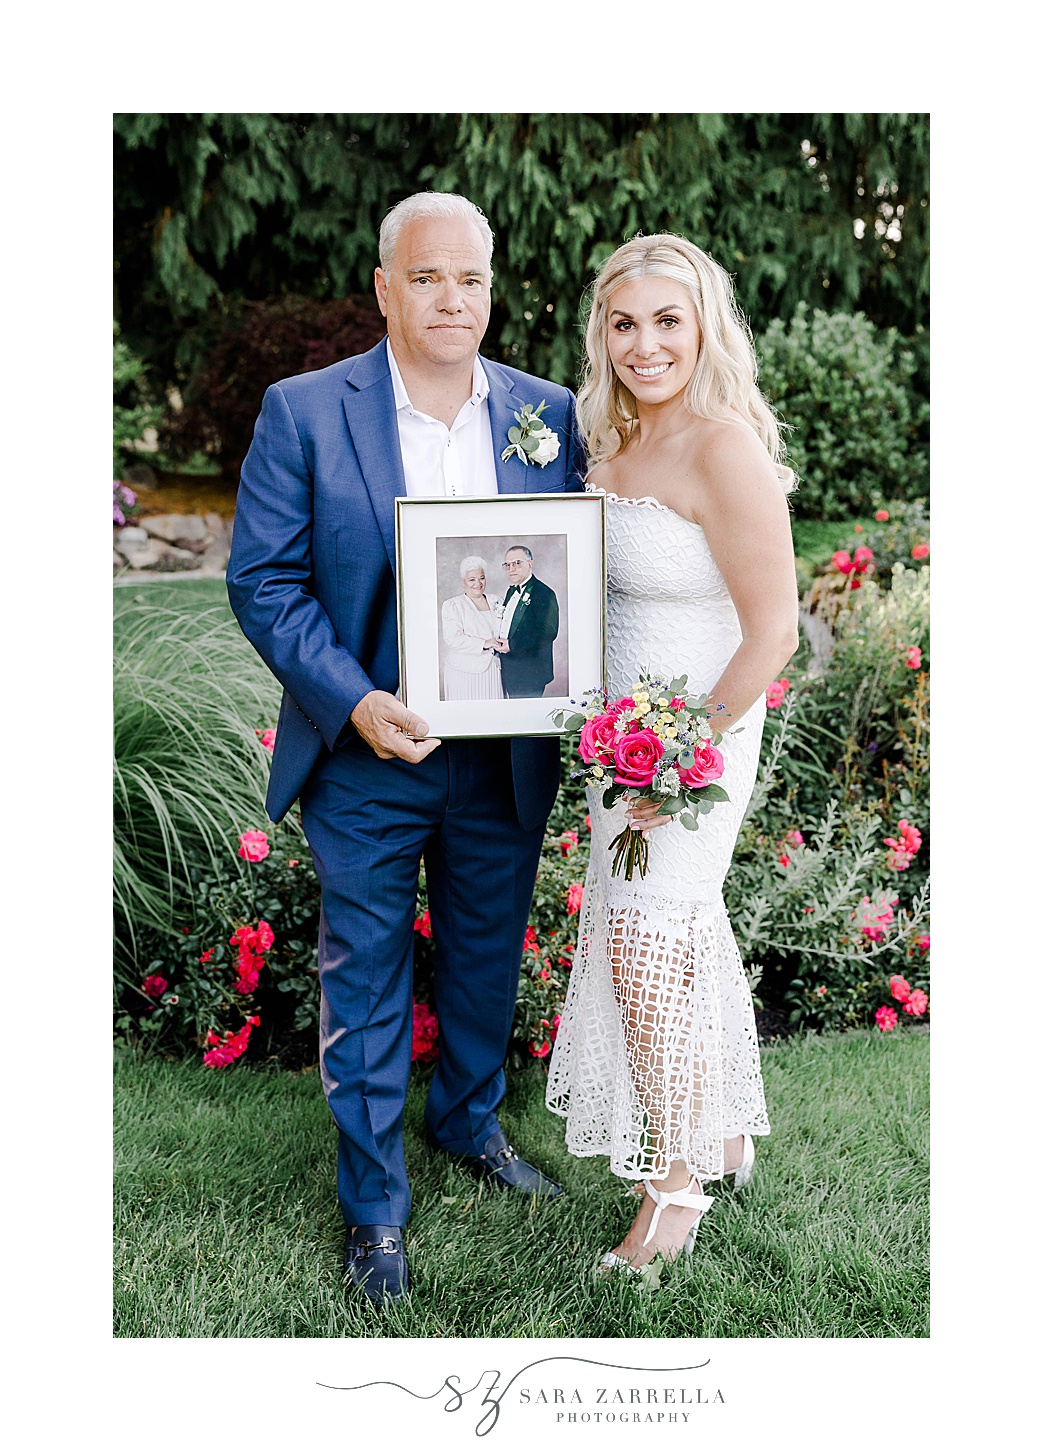 bride and groom stand holding photo of parents on wedding day